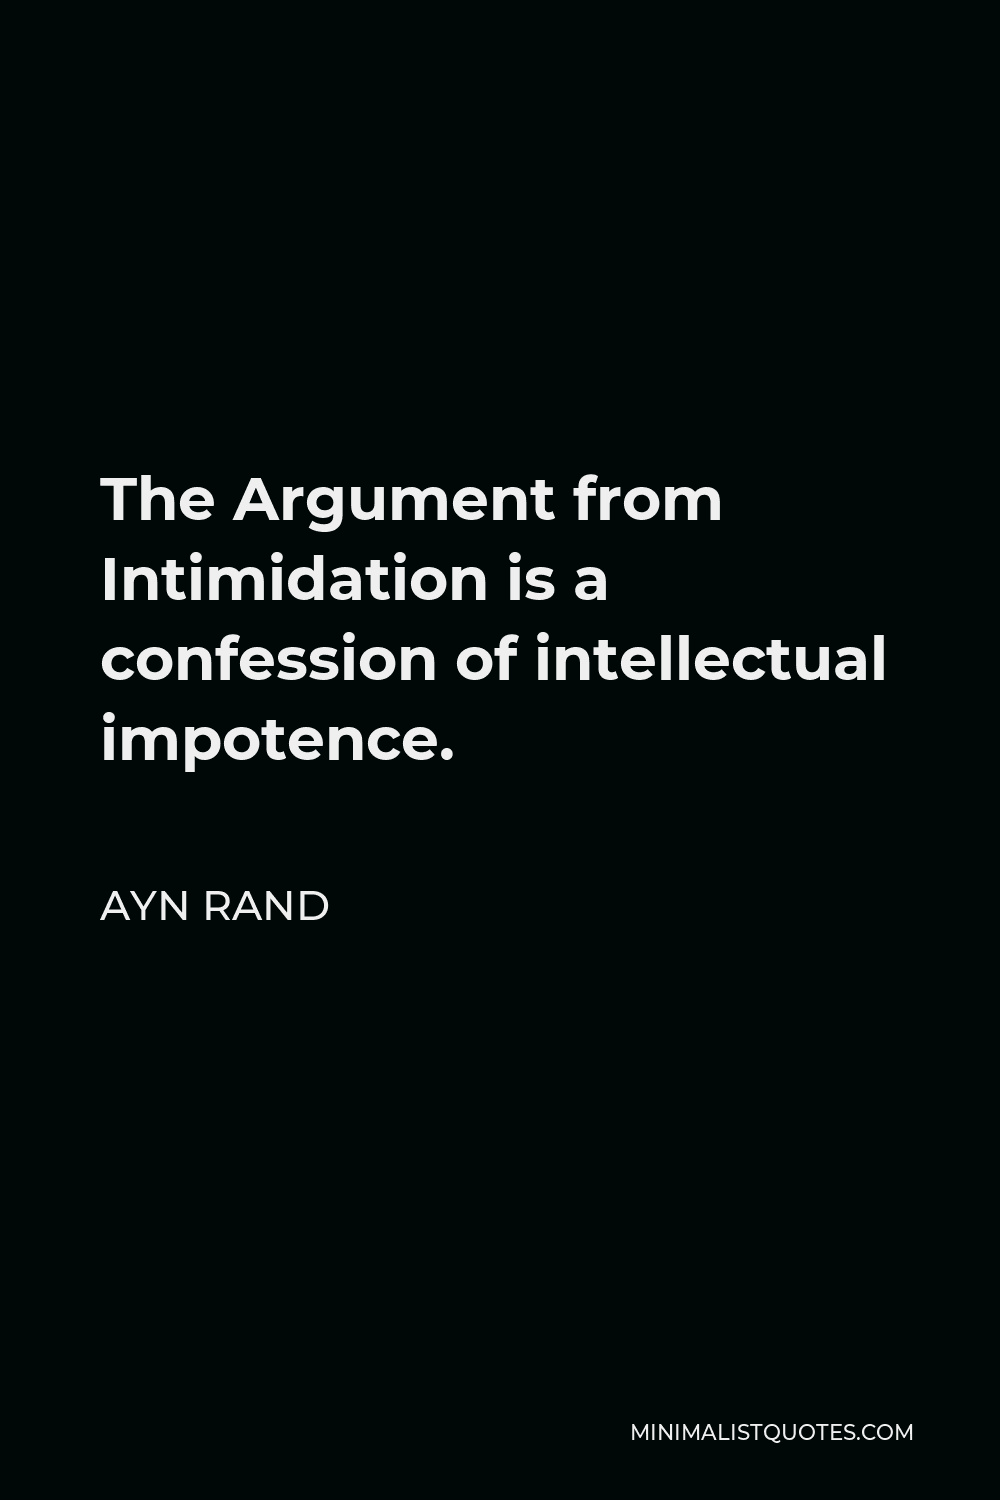 Ayn Rand Quote - The Argument from Intimidation is a confession of intellectual impotence.